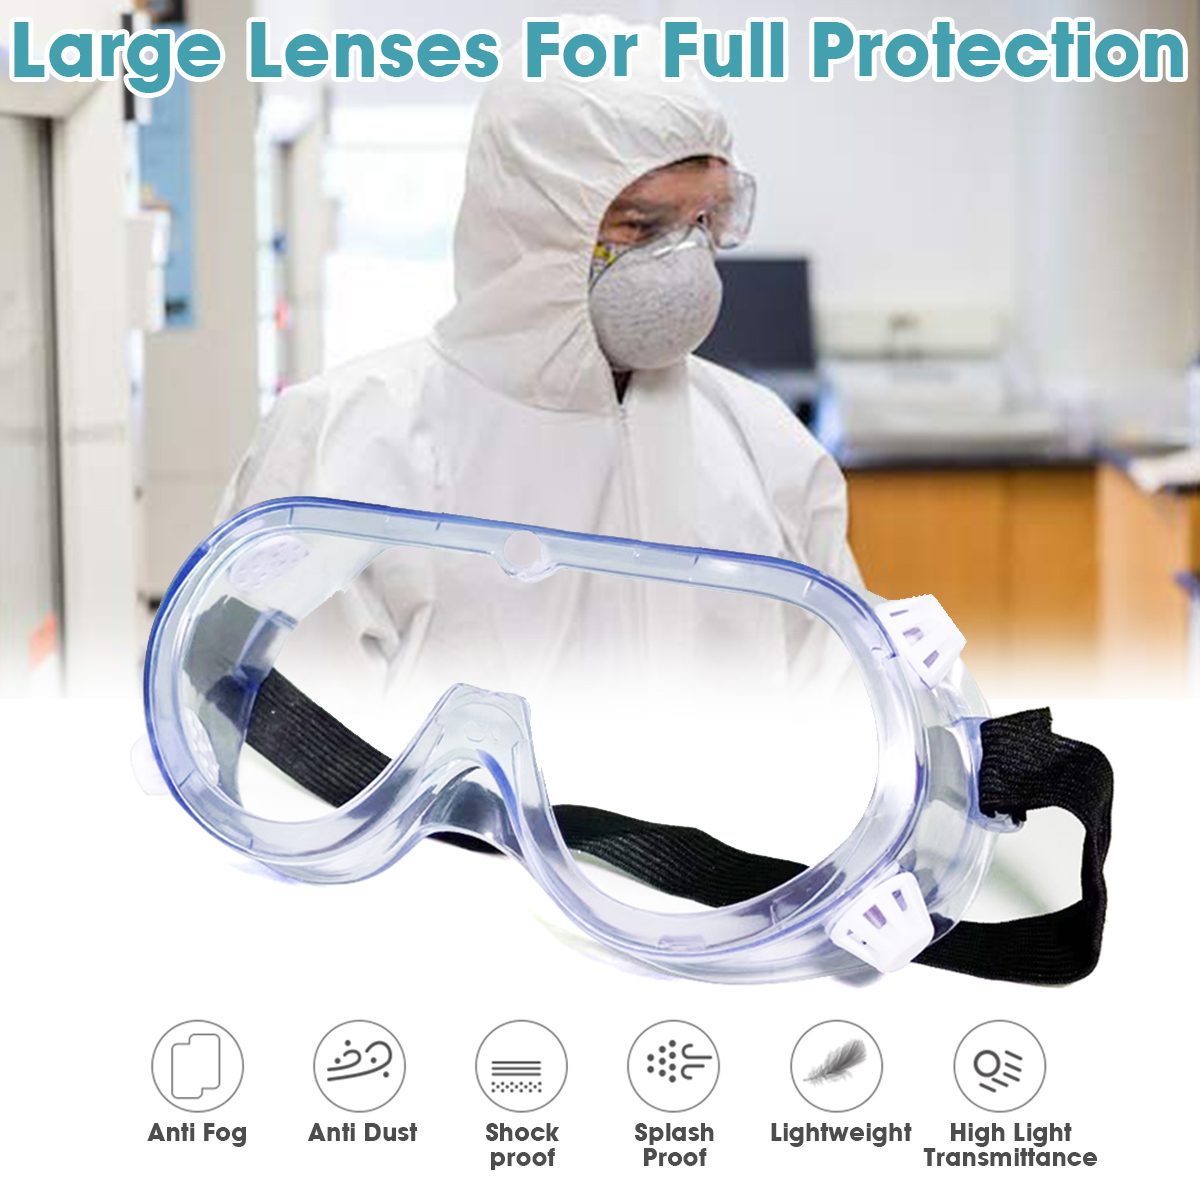 Transparent-Anti-Fog-Windproof-Safety-Protective-Goggles-For-Lab-Eye-Protection-Work-Security-Outdoo-1683343-2